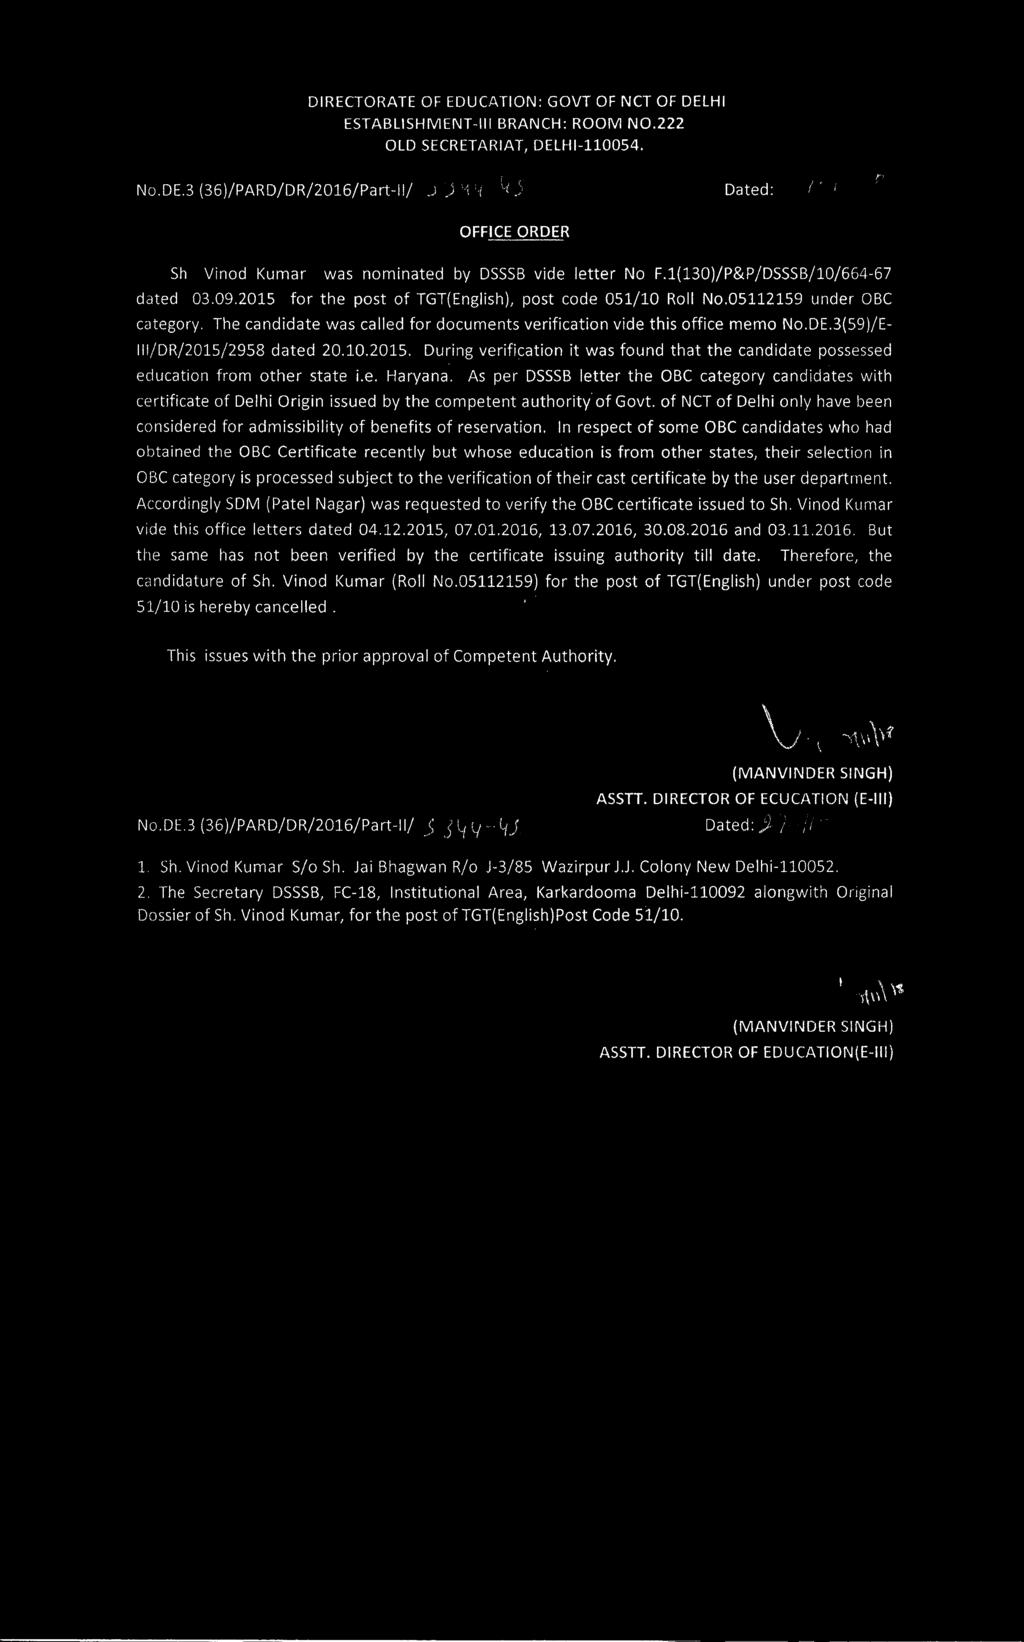 ESTABLISHMENT-Ill BRANCH: ROOM NO.222 Sh Vinod Kumar was nominated by DSSSB vide letter No F.1(130)/P&P/DSSSB/10/664-67 dated 03.09.2015 for the post of TGT(English), post code 051/10 Roll No.